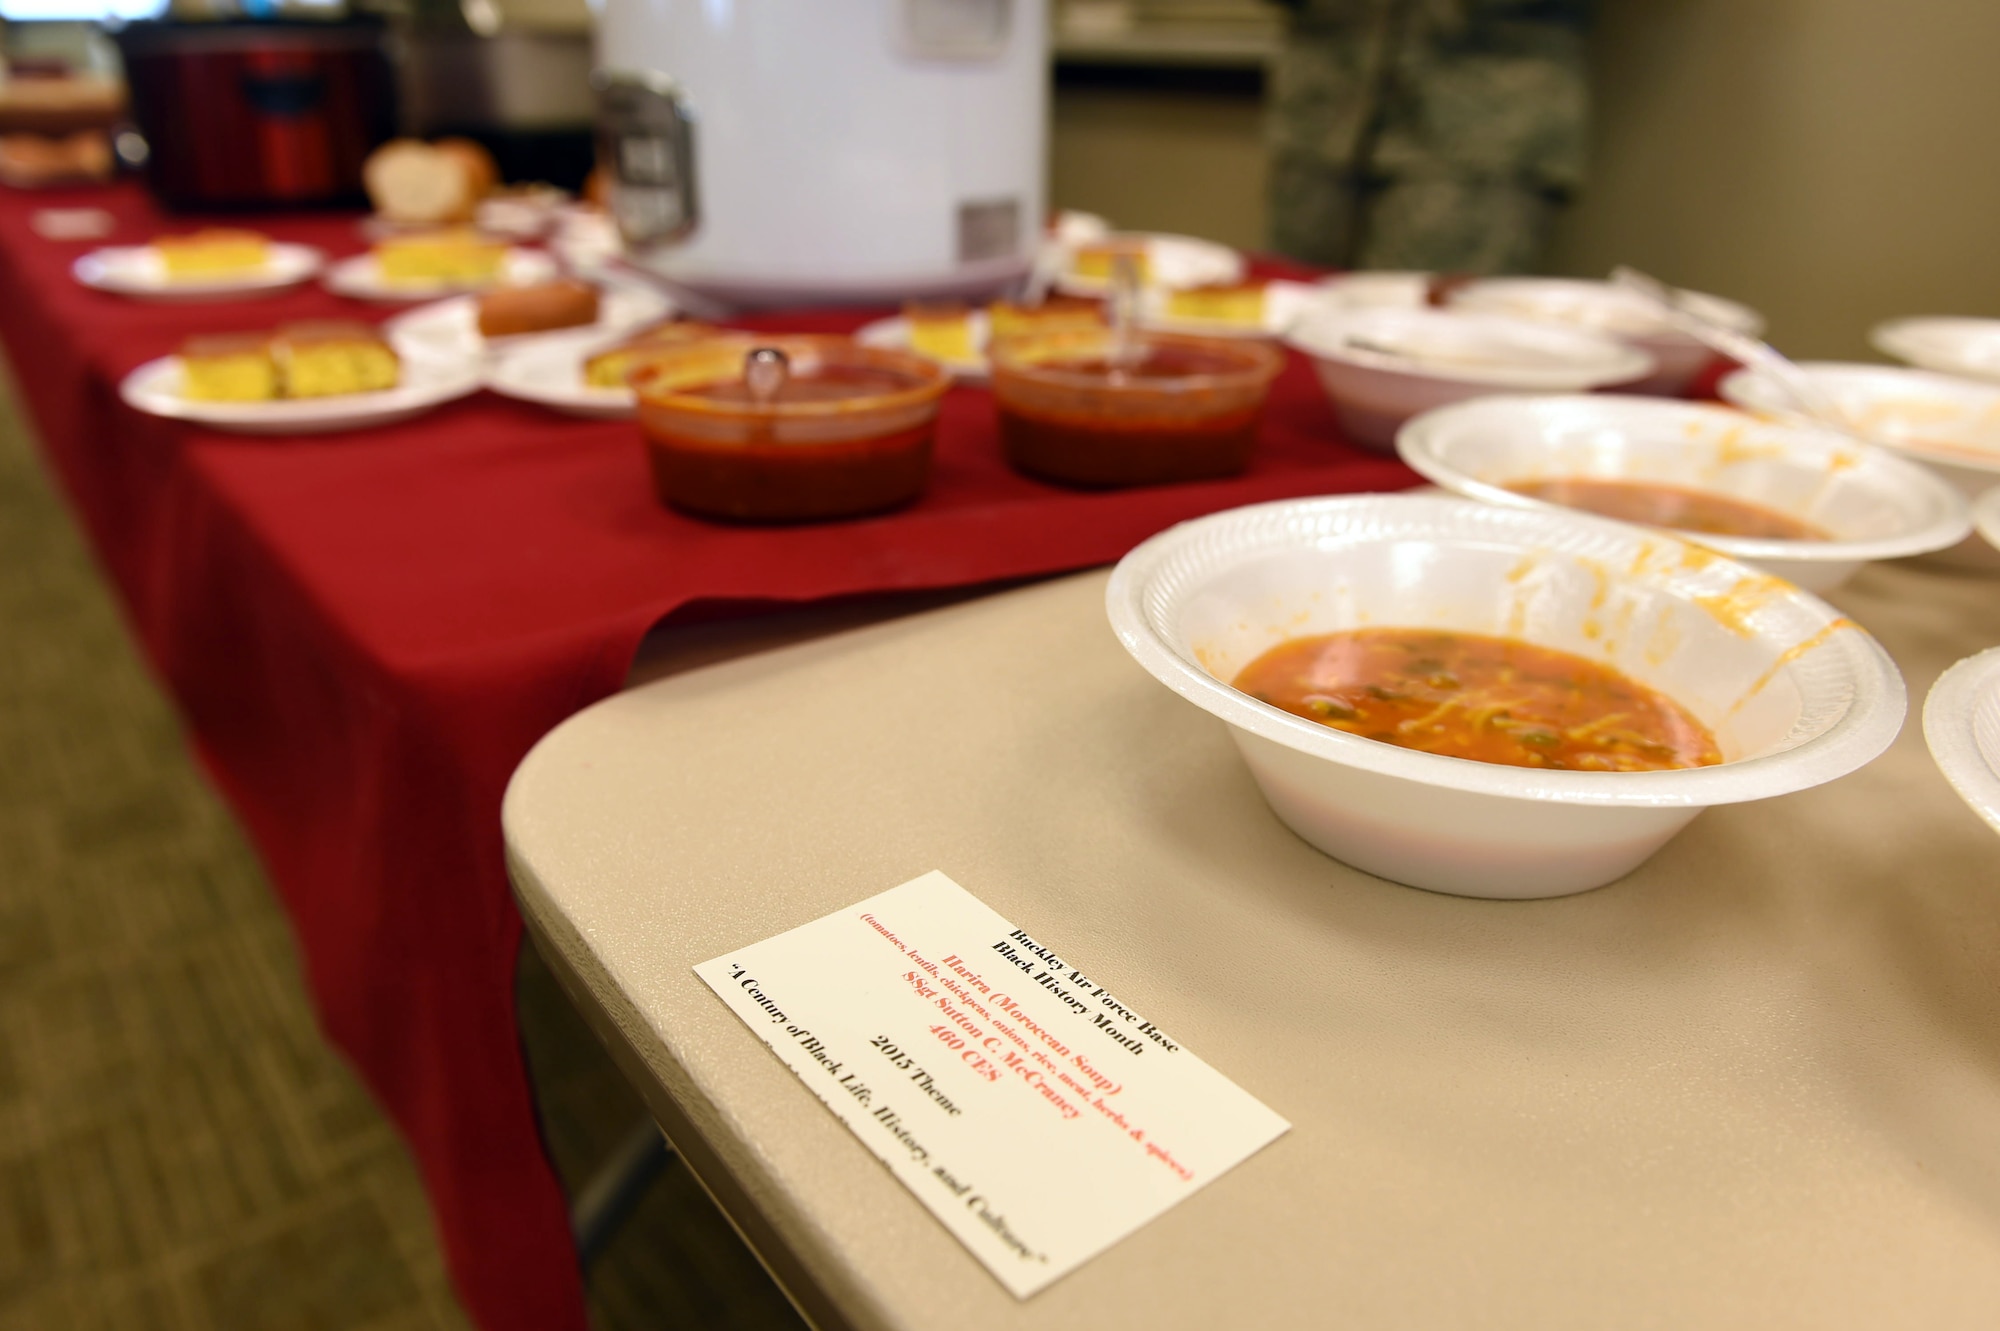 Food is displayed on tables during a Black History Month presentation Feb. 26, 2015, at the chapel on Buckley Air Force Base, Colo. Team Buckley members listened to a presentation by Vern L. Howard, Martin Luther King Jr. Colorado Holiday Commission chairman, while sampling the cultural food. (U.S. Air Force photo by Airman 1st Class Samantha Saulsbury/Released)